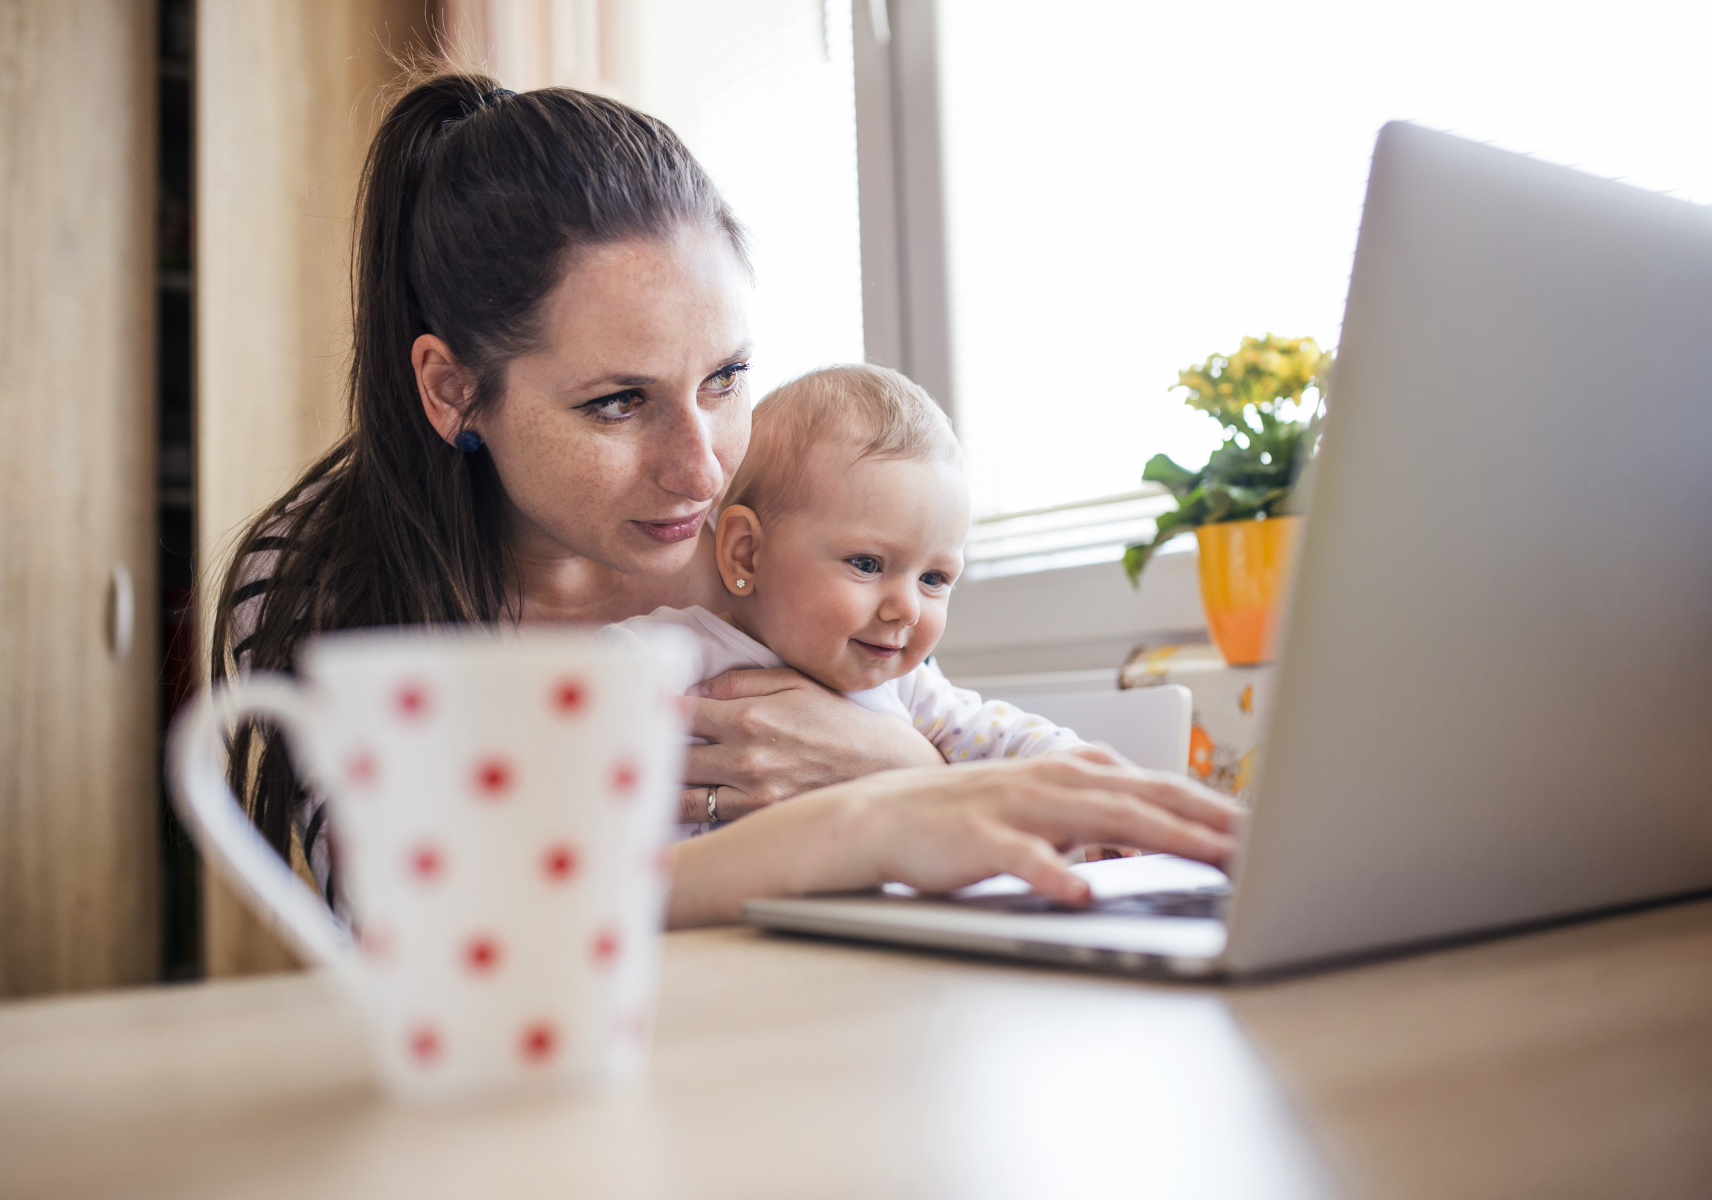 Young mother with a baby looking at a computer screen